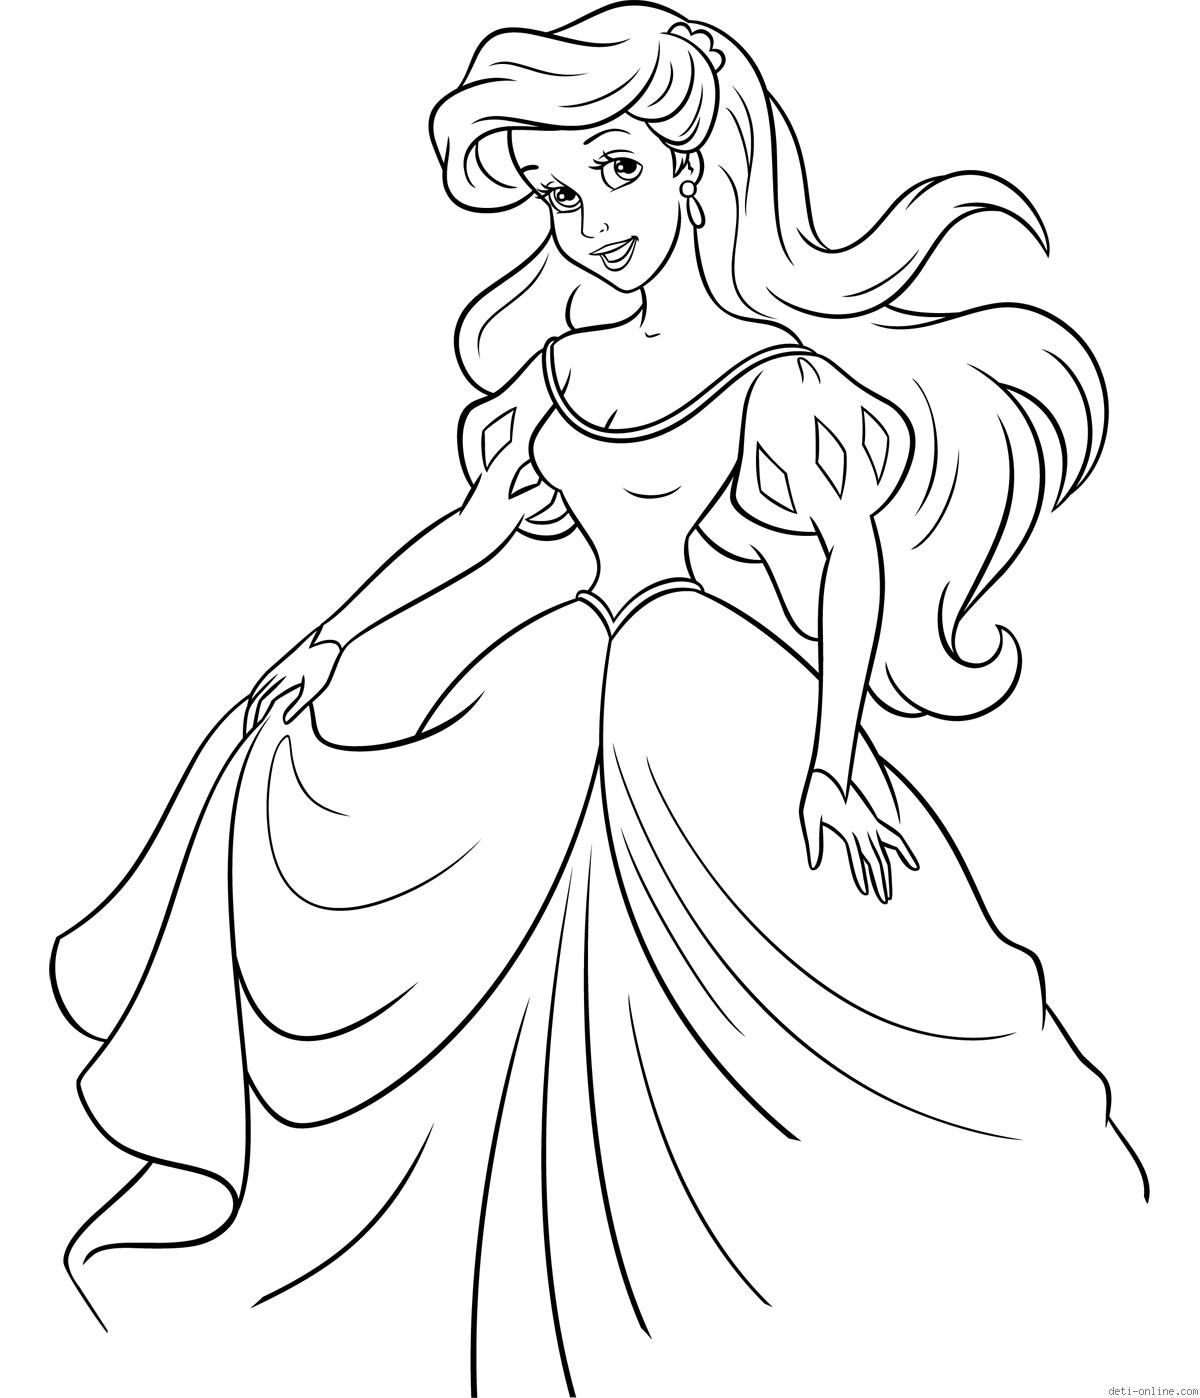 Mermaid Princess Ariel Coloring Pages Coloring Pages